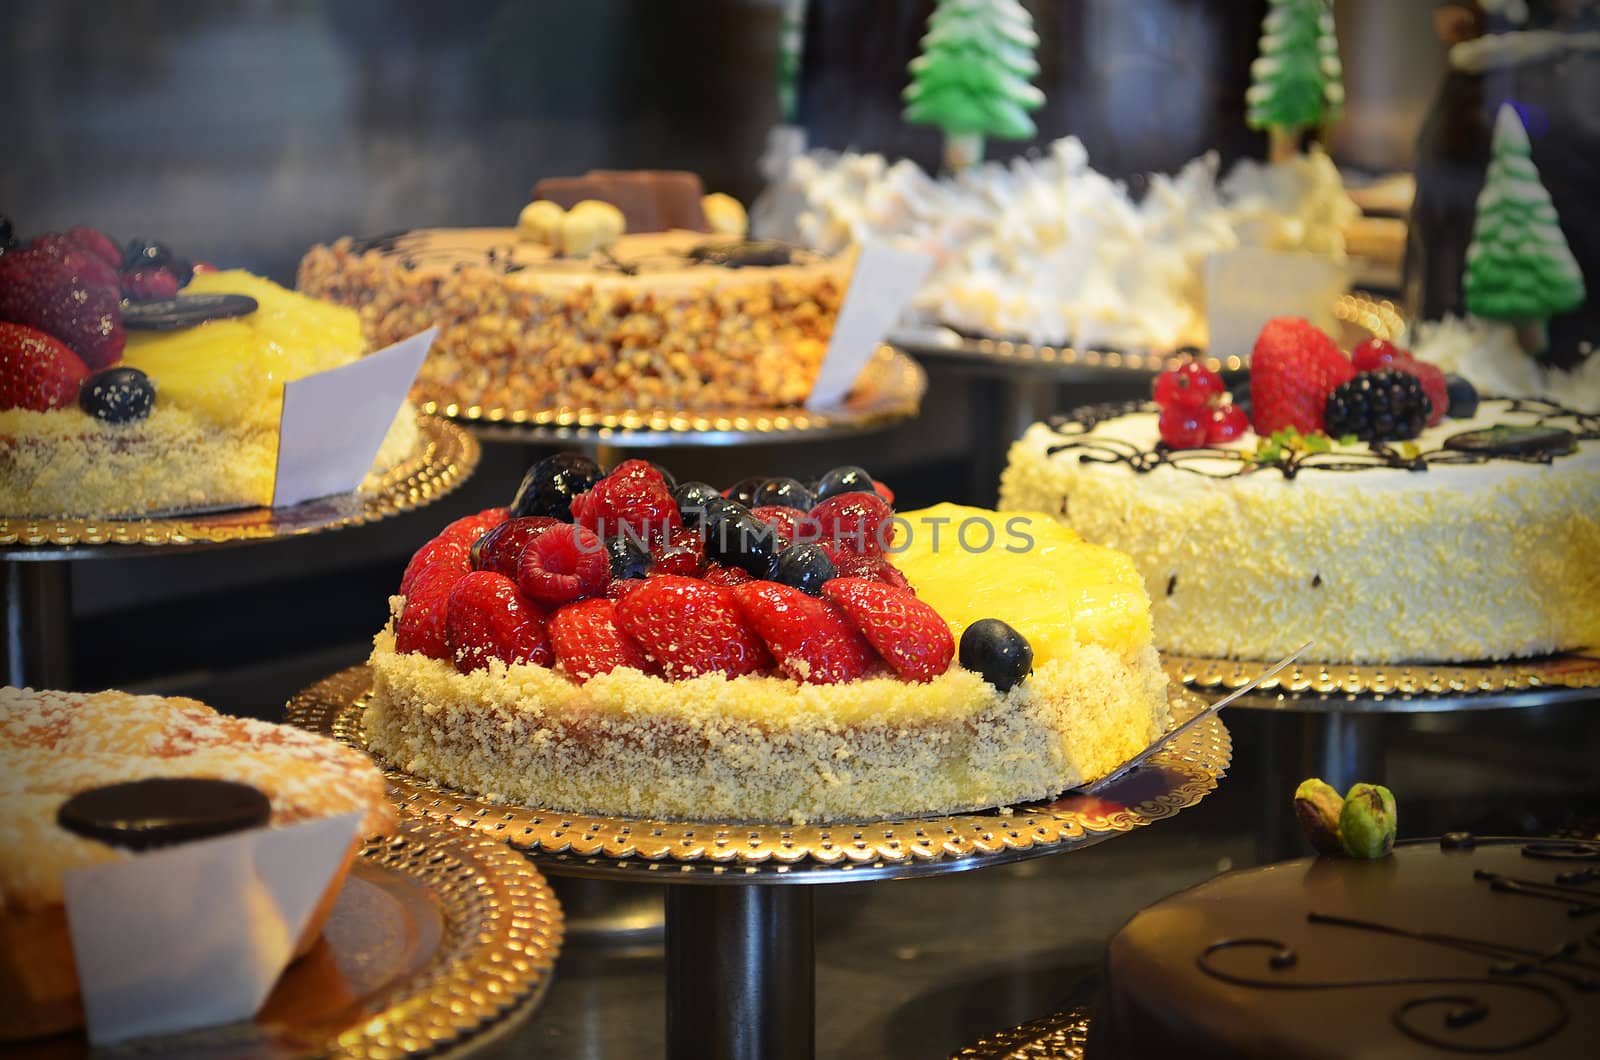 Gourmet cakes in a shop window by artofphoto